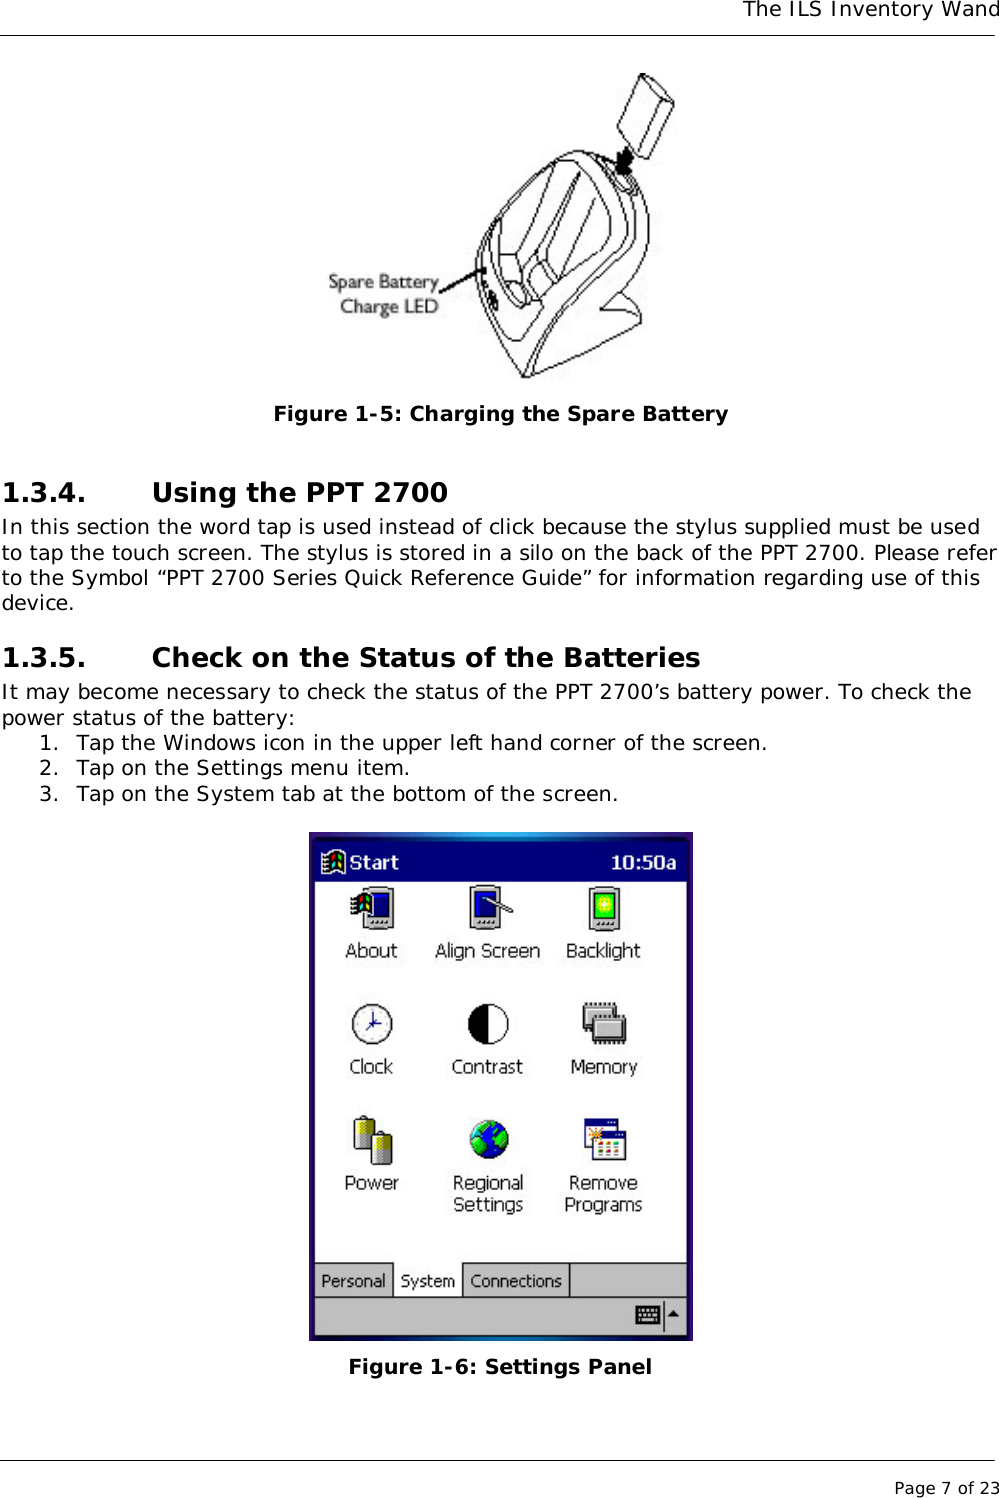 The ILS Inventory WandPage 7 of 23Figure 1-5: Charging the Spare Battery1.3.4. Using the PPT 2700In this section the word tap is used instead of click because the stylus supplied must be usedto tap the touch screen. The stylus is stored in a silo on the back of the PPT 2700. Please referto the Symbol “PPT 2700 Series Quick Reference Guide” for information regarding use of thisdevice.1.3.5. Check on the Status of the BatteriesIt may become necessary to check the status of the PPT 2700’s battery power. To check thepower status of the battery:1. Tap the Windows icon in the upper left hand corner of the screen.2. Tap on the Settings menu item.3. Tap on the System tab at the bottom of the screen.Figure 1-6: Settings Panel